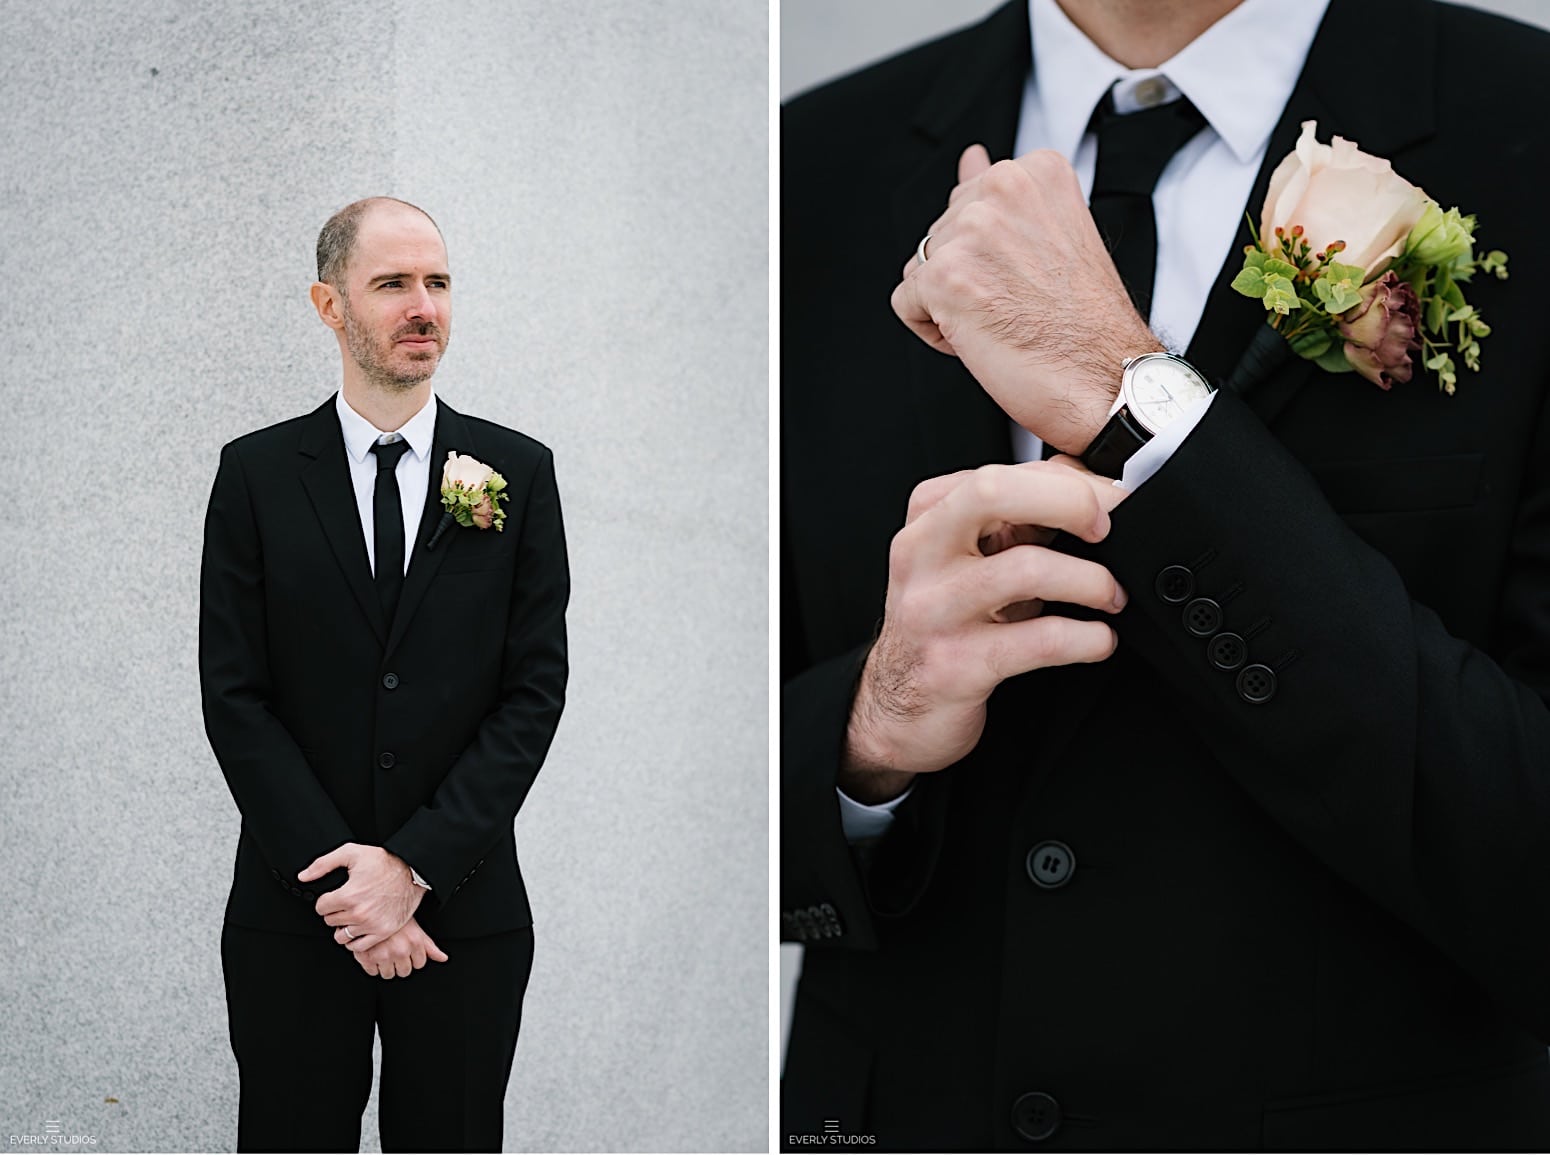 Four Freedoms Park wedding on Roosevelt Island NYC. Photos by NYC elopement photographer Everly Studios.